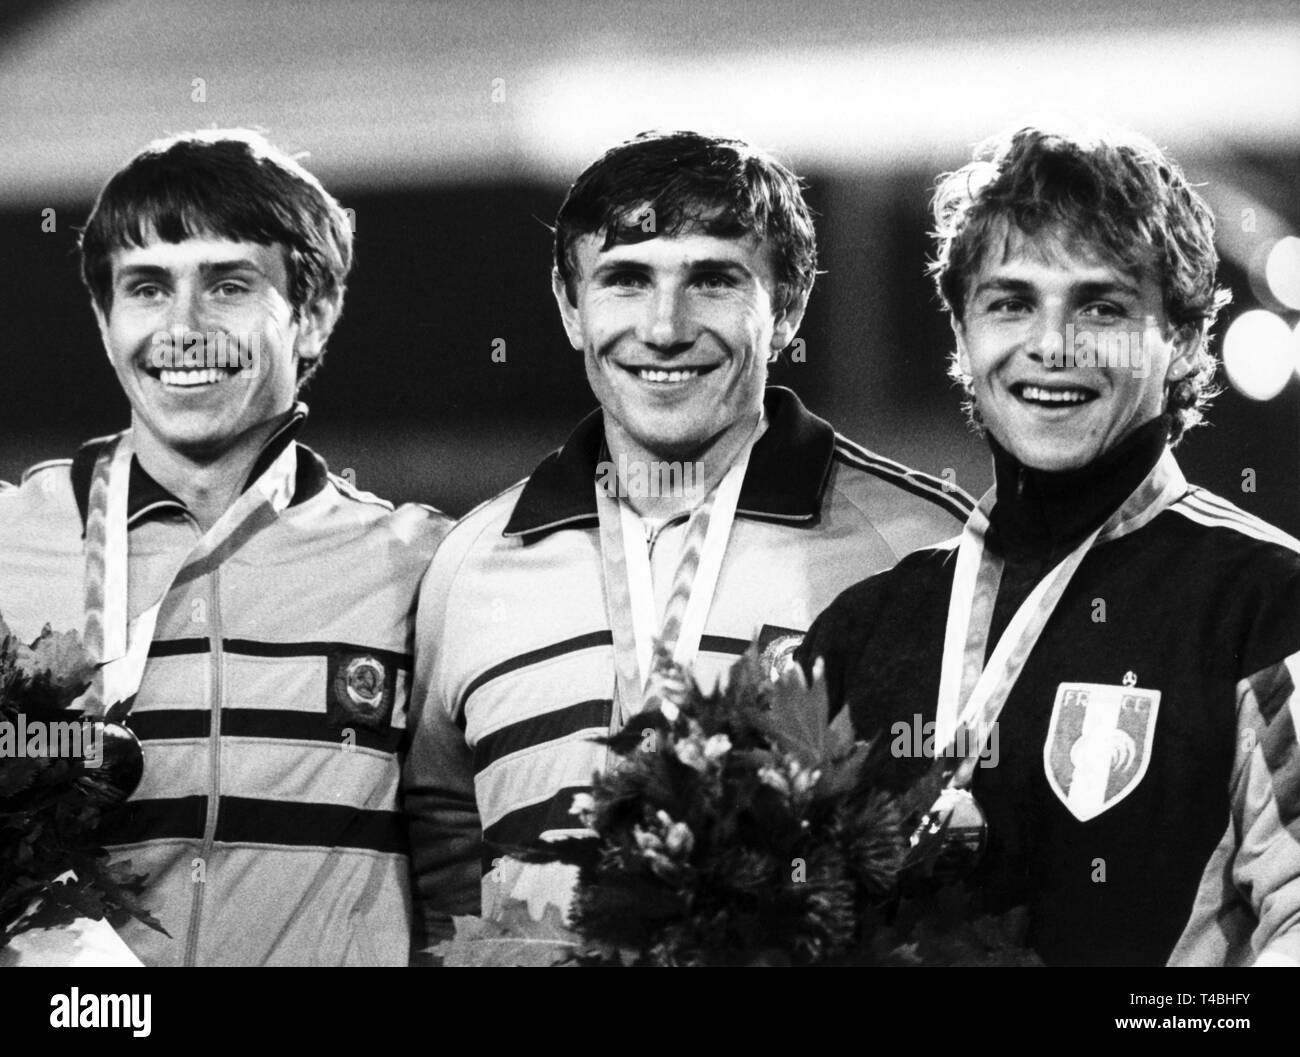 Brothers Sergej and Wassili Bubka from the Soviet Union celebrated a double win at pole vault on 29th August 1986. World record holder Sergej (m) won with 5,85m before his brother Wassili (l) with 5,75m and the Frenchman Philippe Collet (r). | usage worldwide Stock Photo